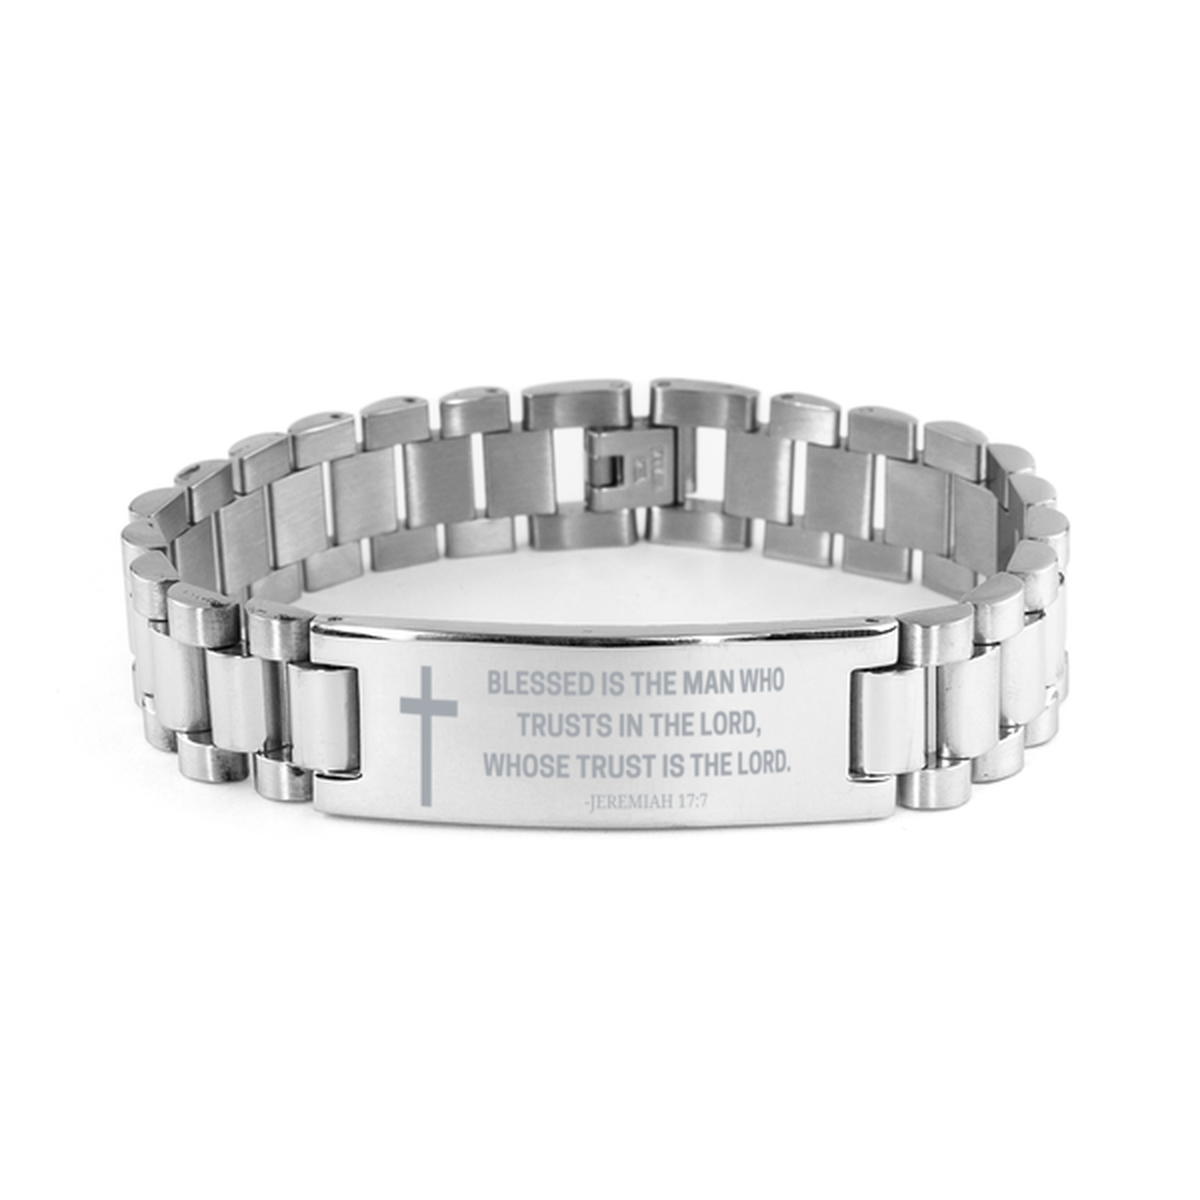 Baptism Gifts For Teenage Boys Girls, Christian Bible Verse Ladder Stainless Steel Bracelet, Blessed is the man who trusts, Catholic Confirmation Gifts for Son, Godson, Grandson, Nephew